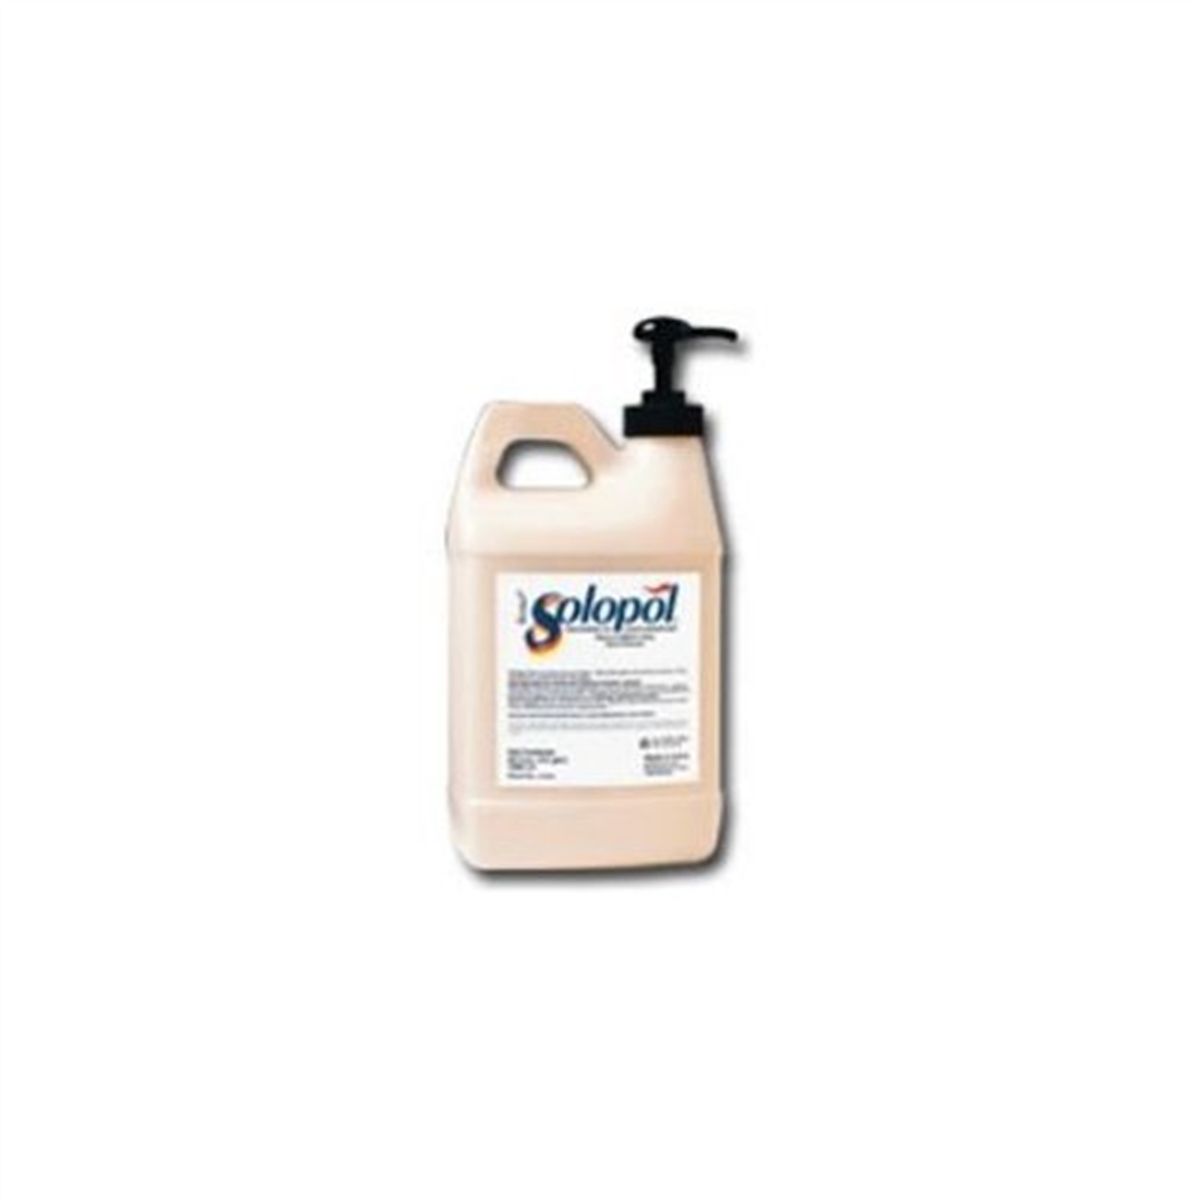 SOLOPOL Hand Cleaner - 1/2 Gal Pump Top